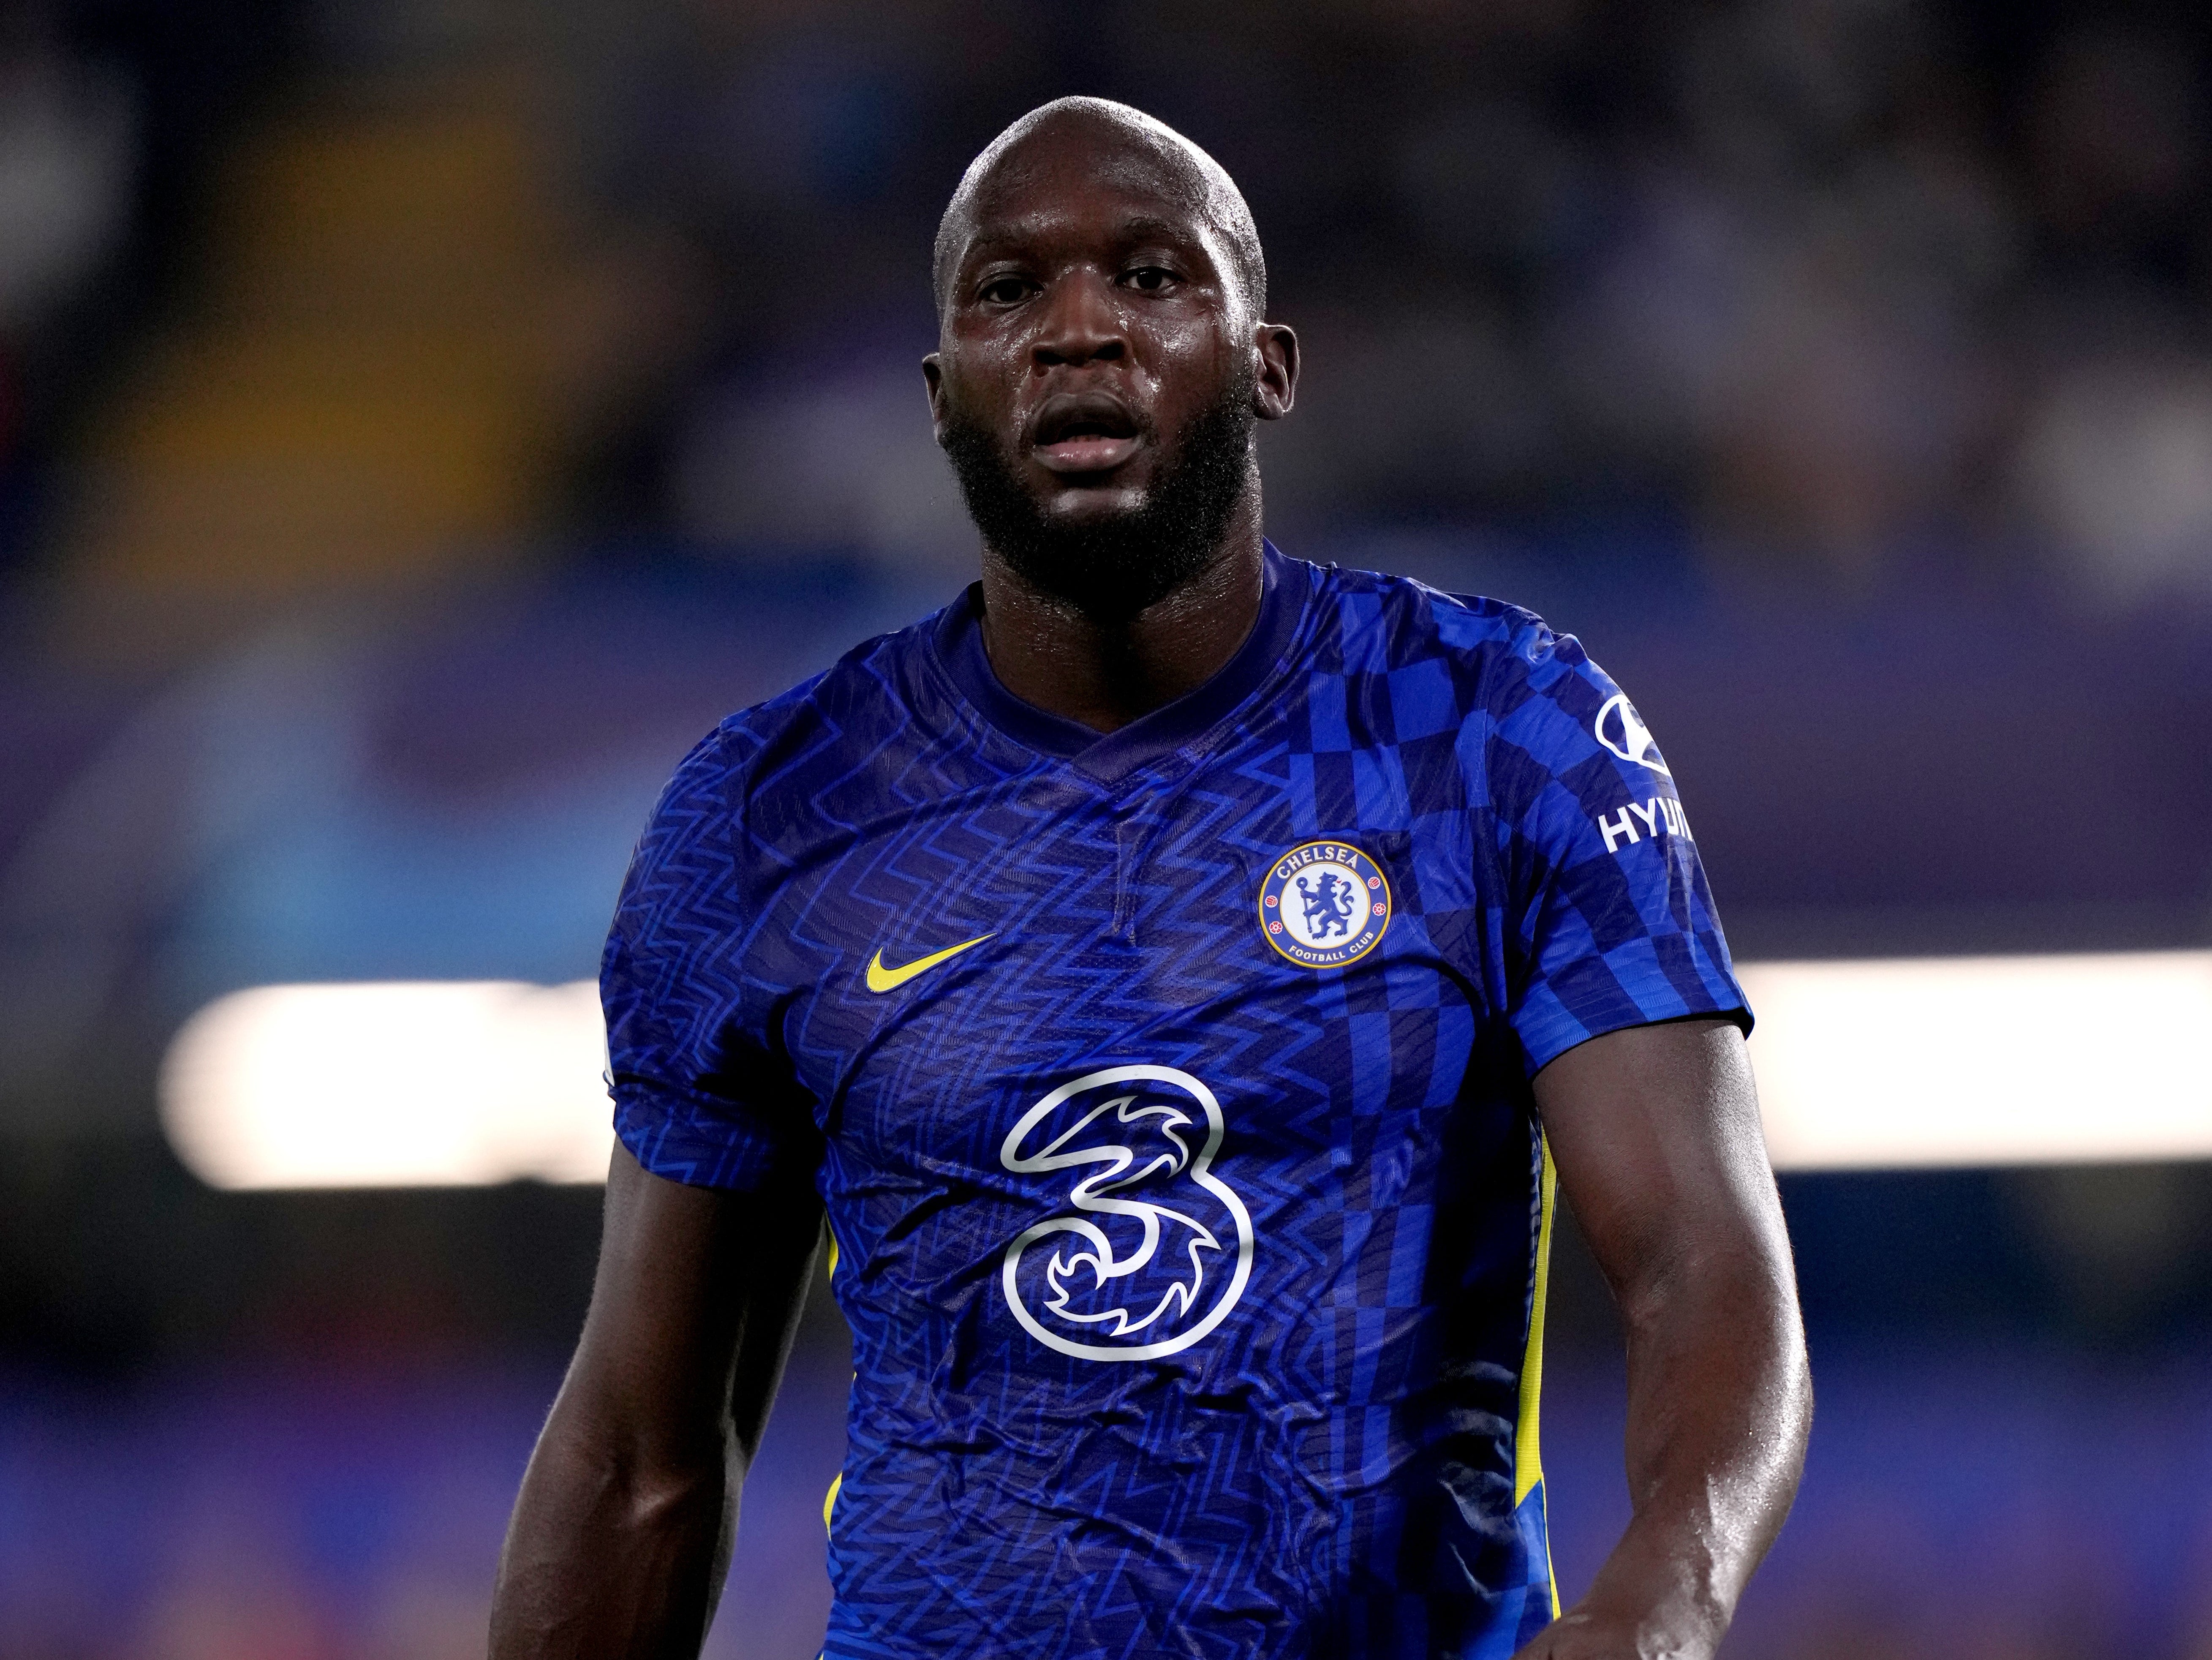 Romelu Lukaku, pictured, has been praised as much for his attitude as his goals at Chelsea (John Walton/PA)